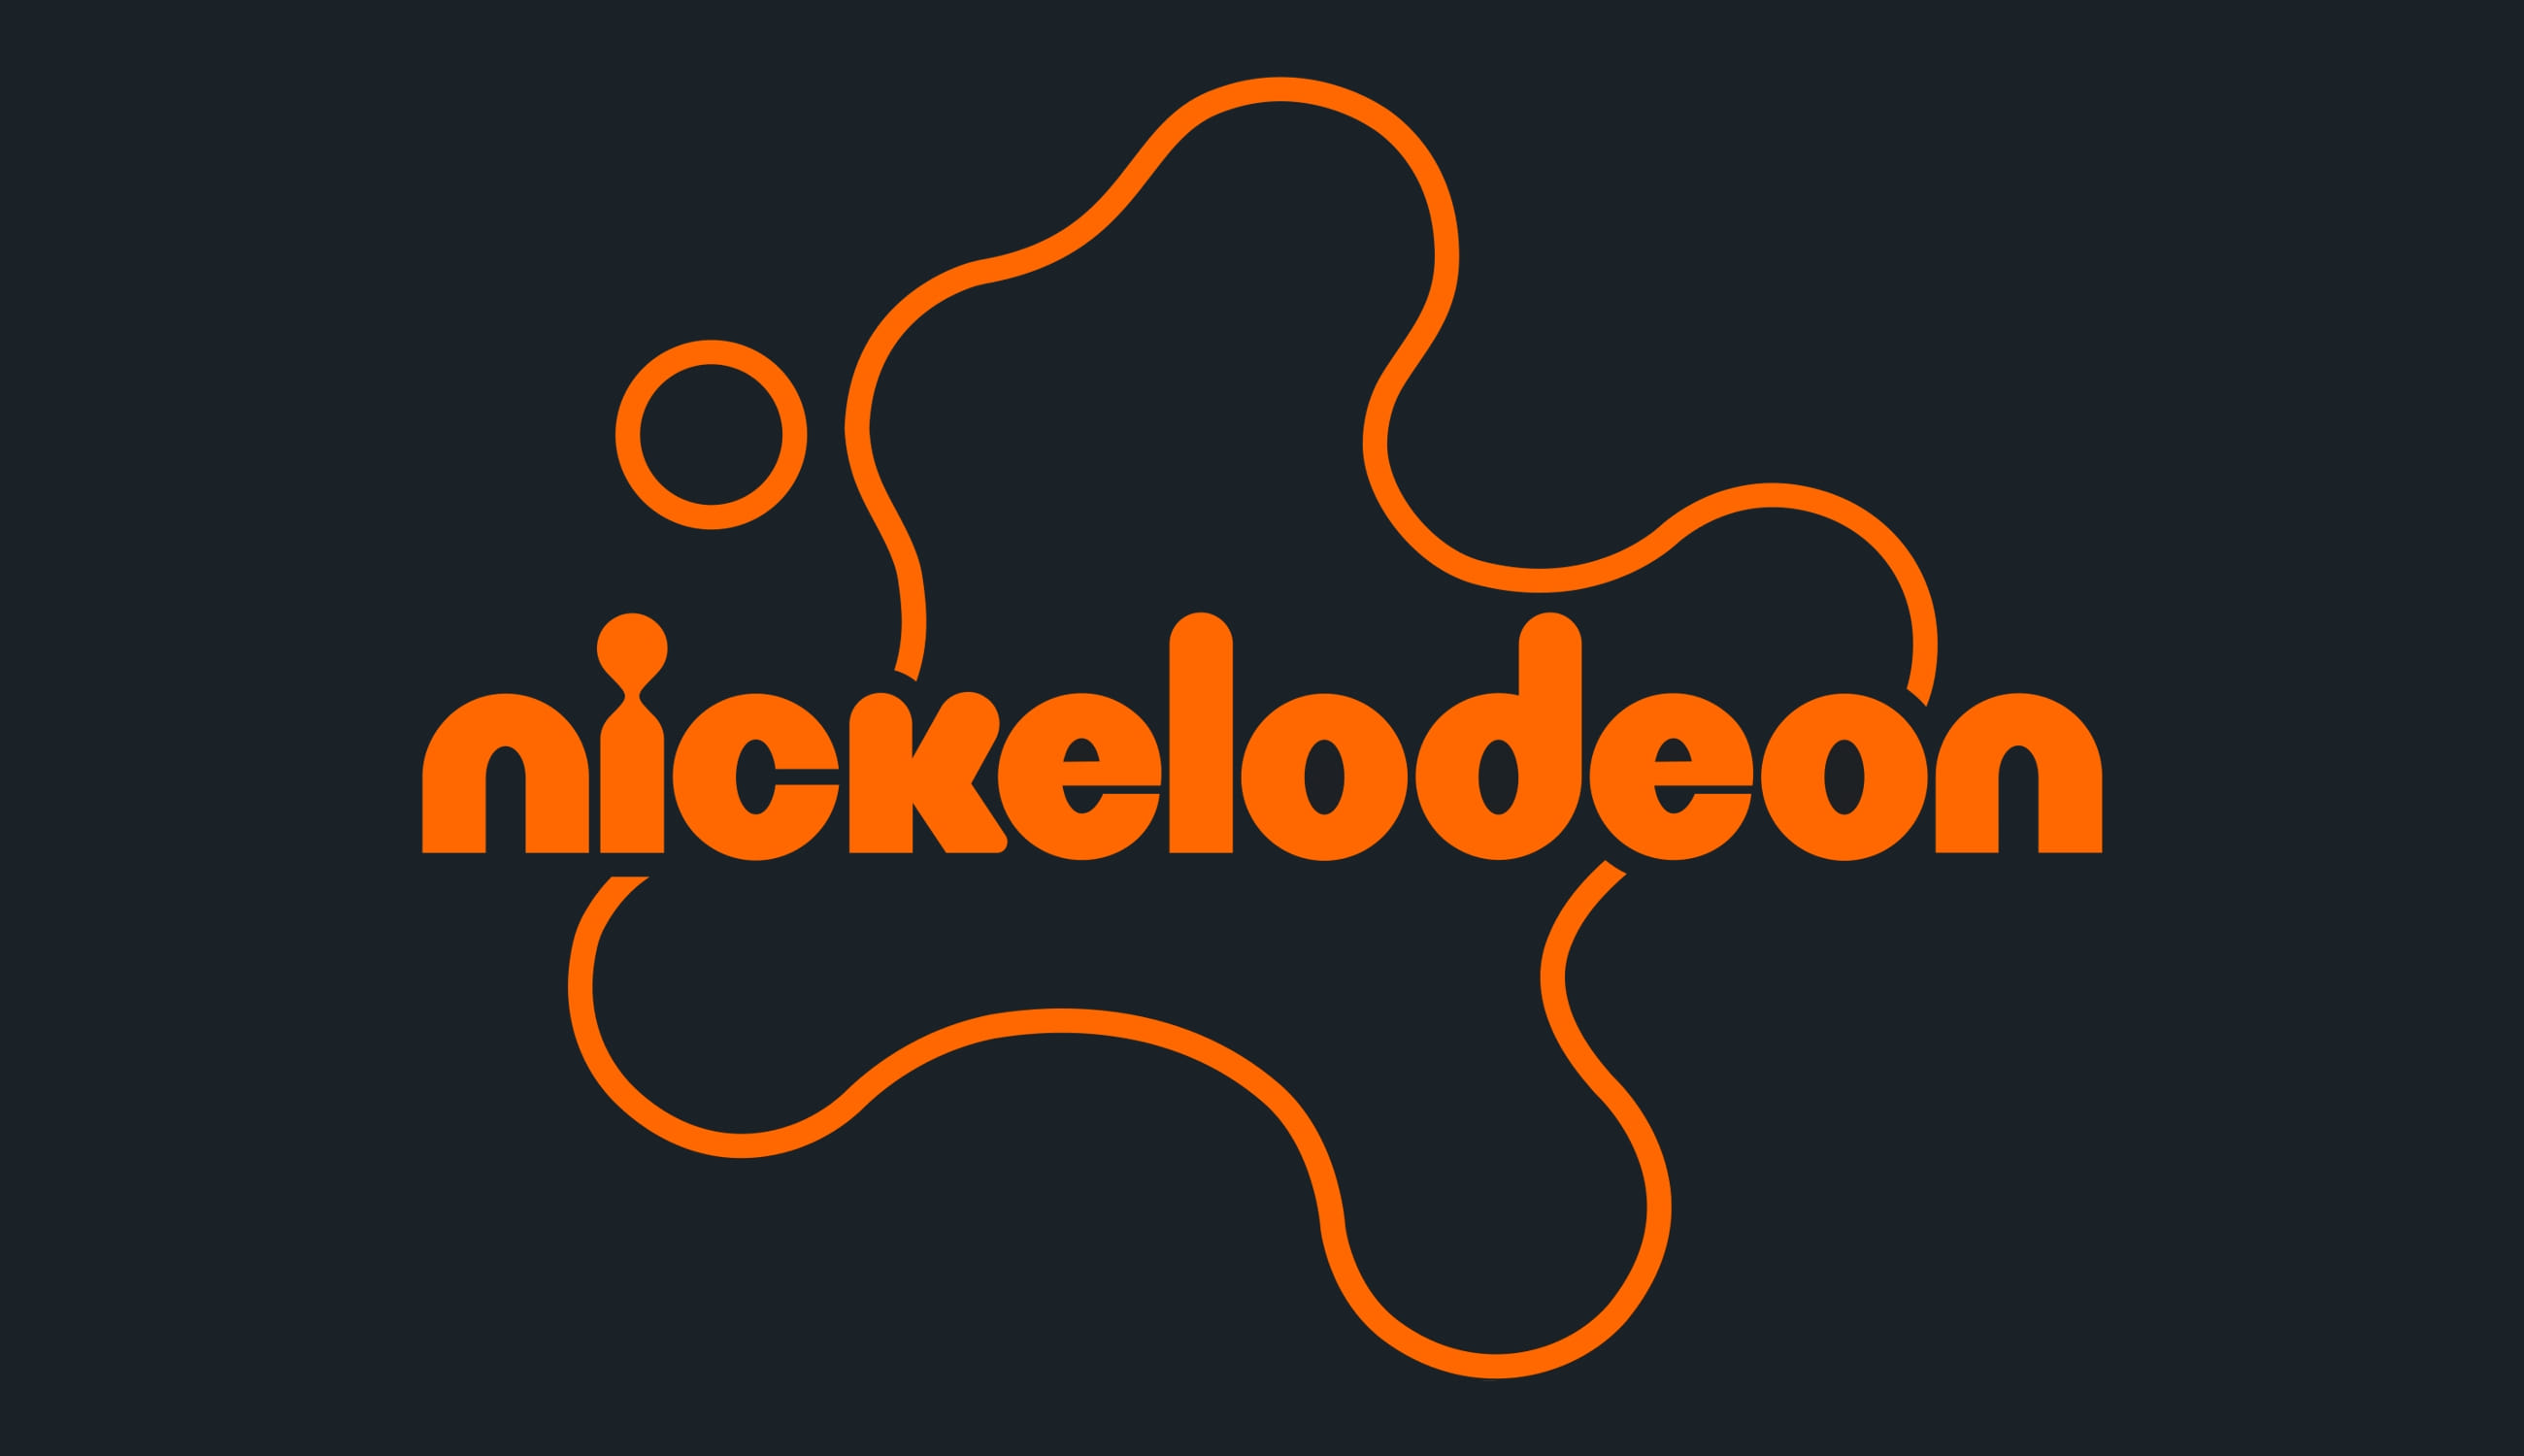 Nickelodeon investigates breach after leak of 'decades old’ data